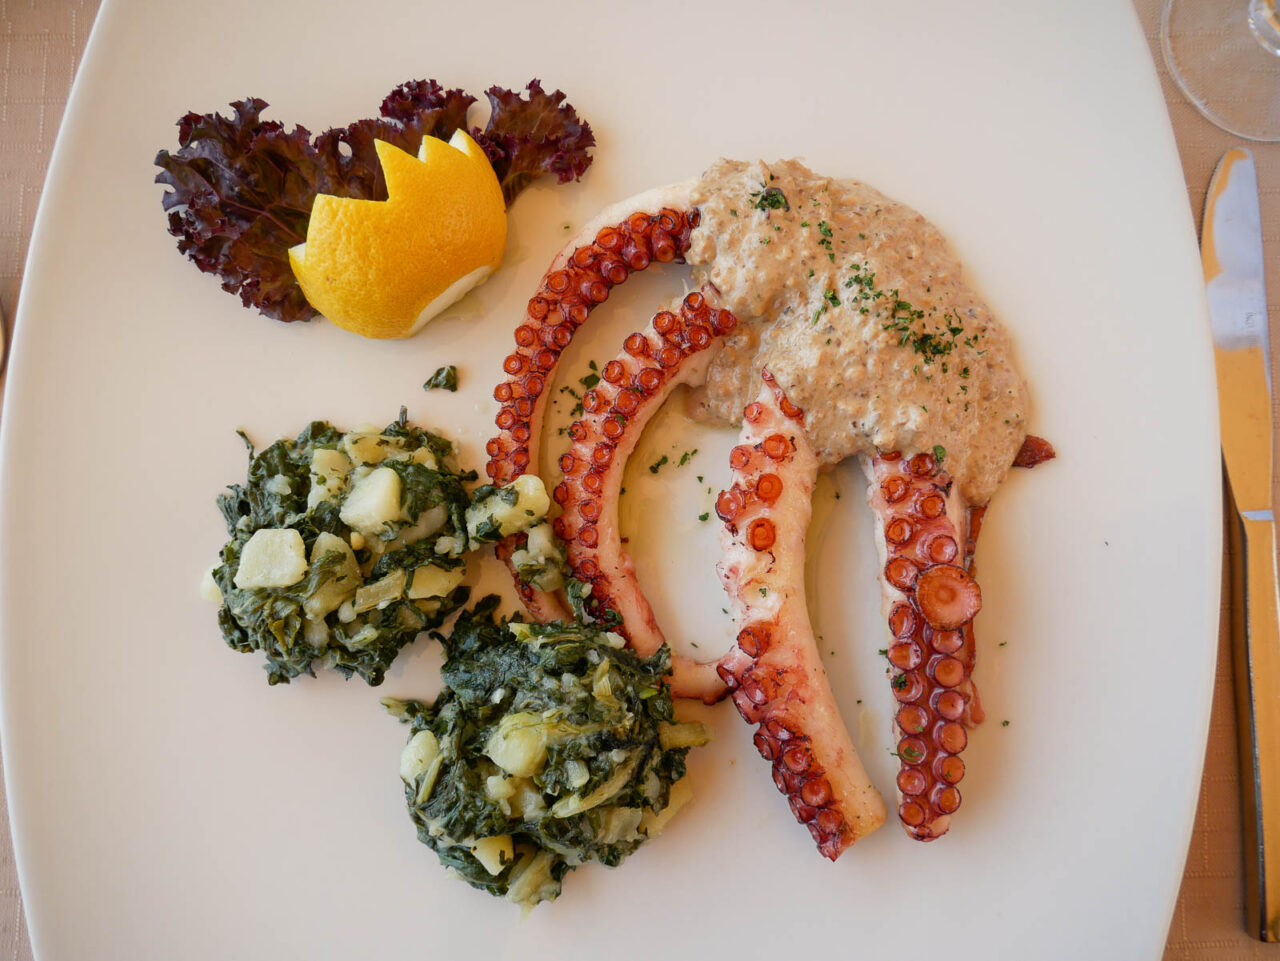 Montenegrin food - grilled octopus with potatoes and spinach